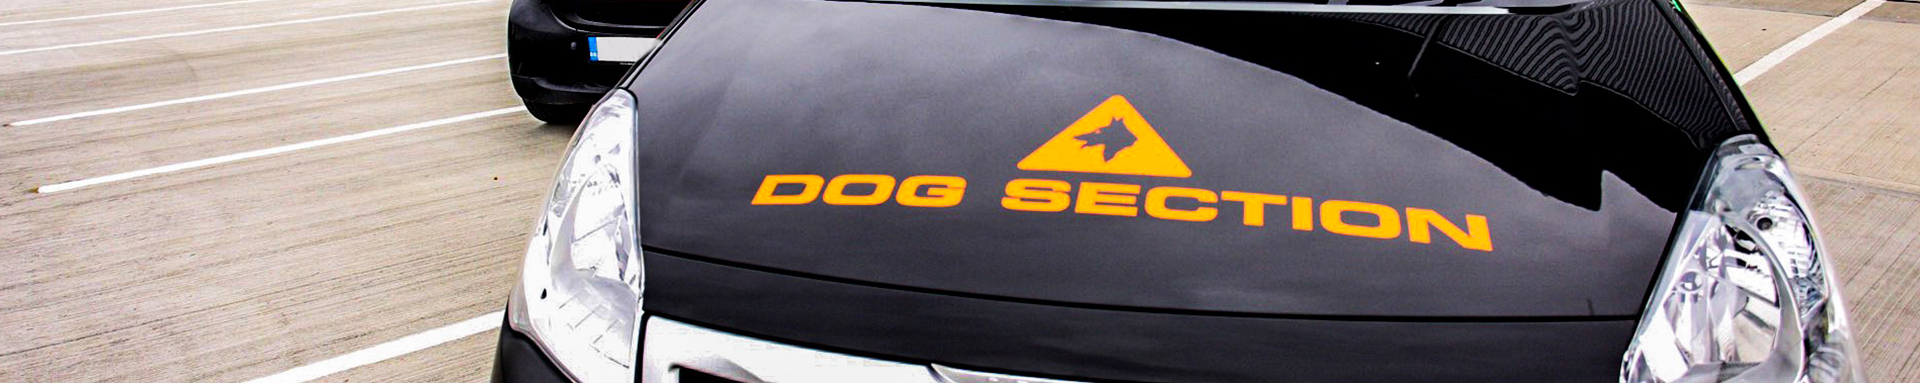 Sniffer Dogs London